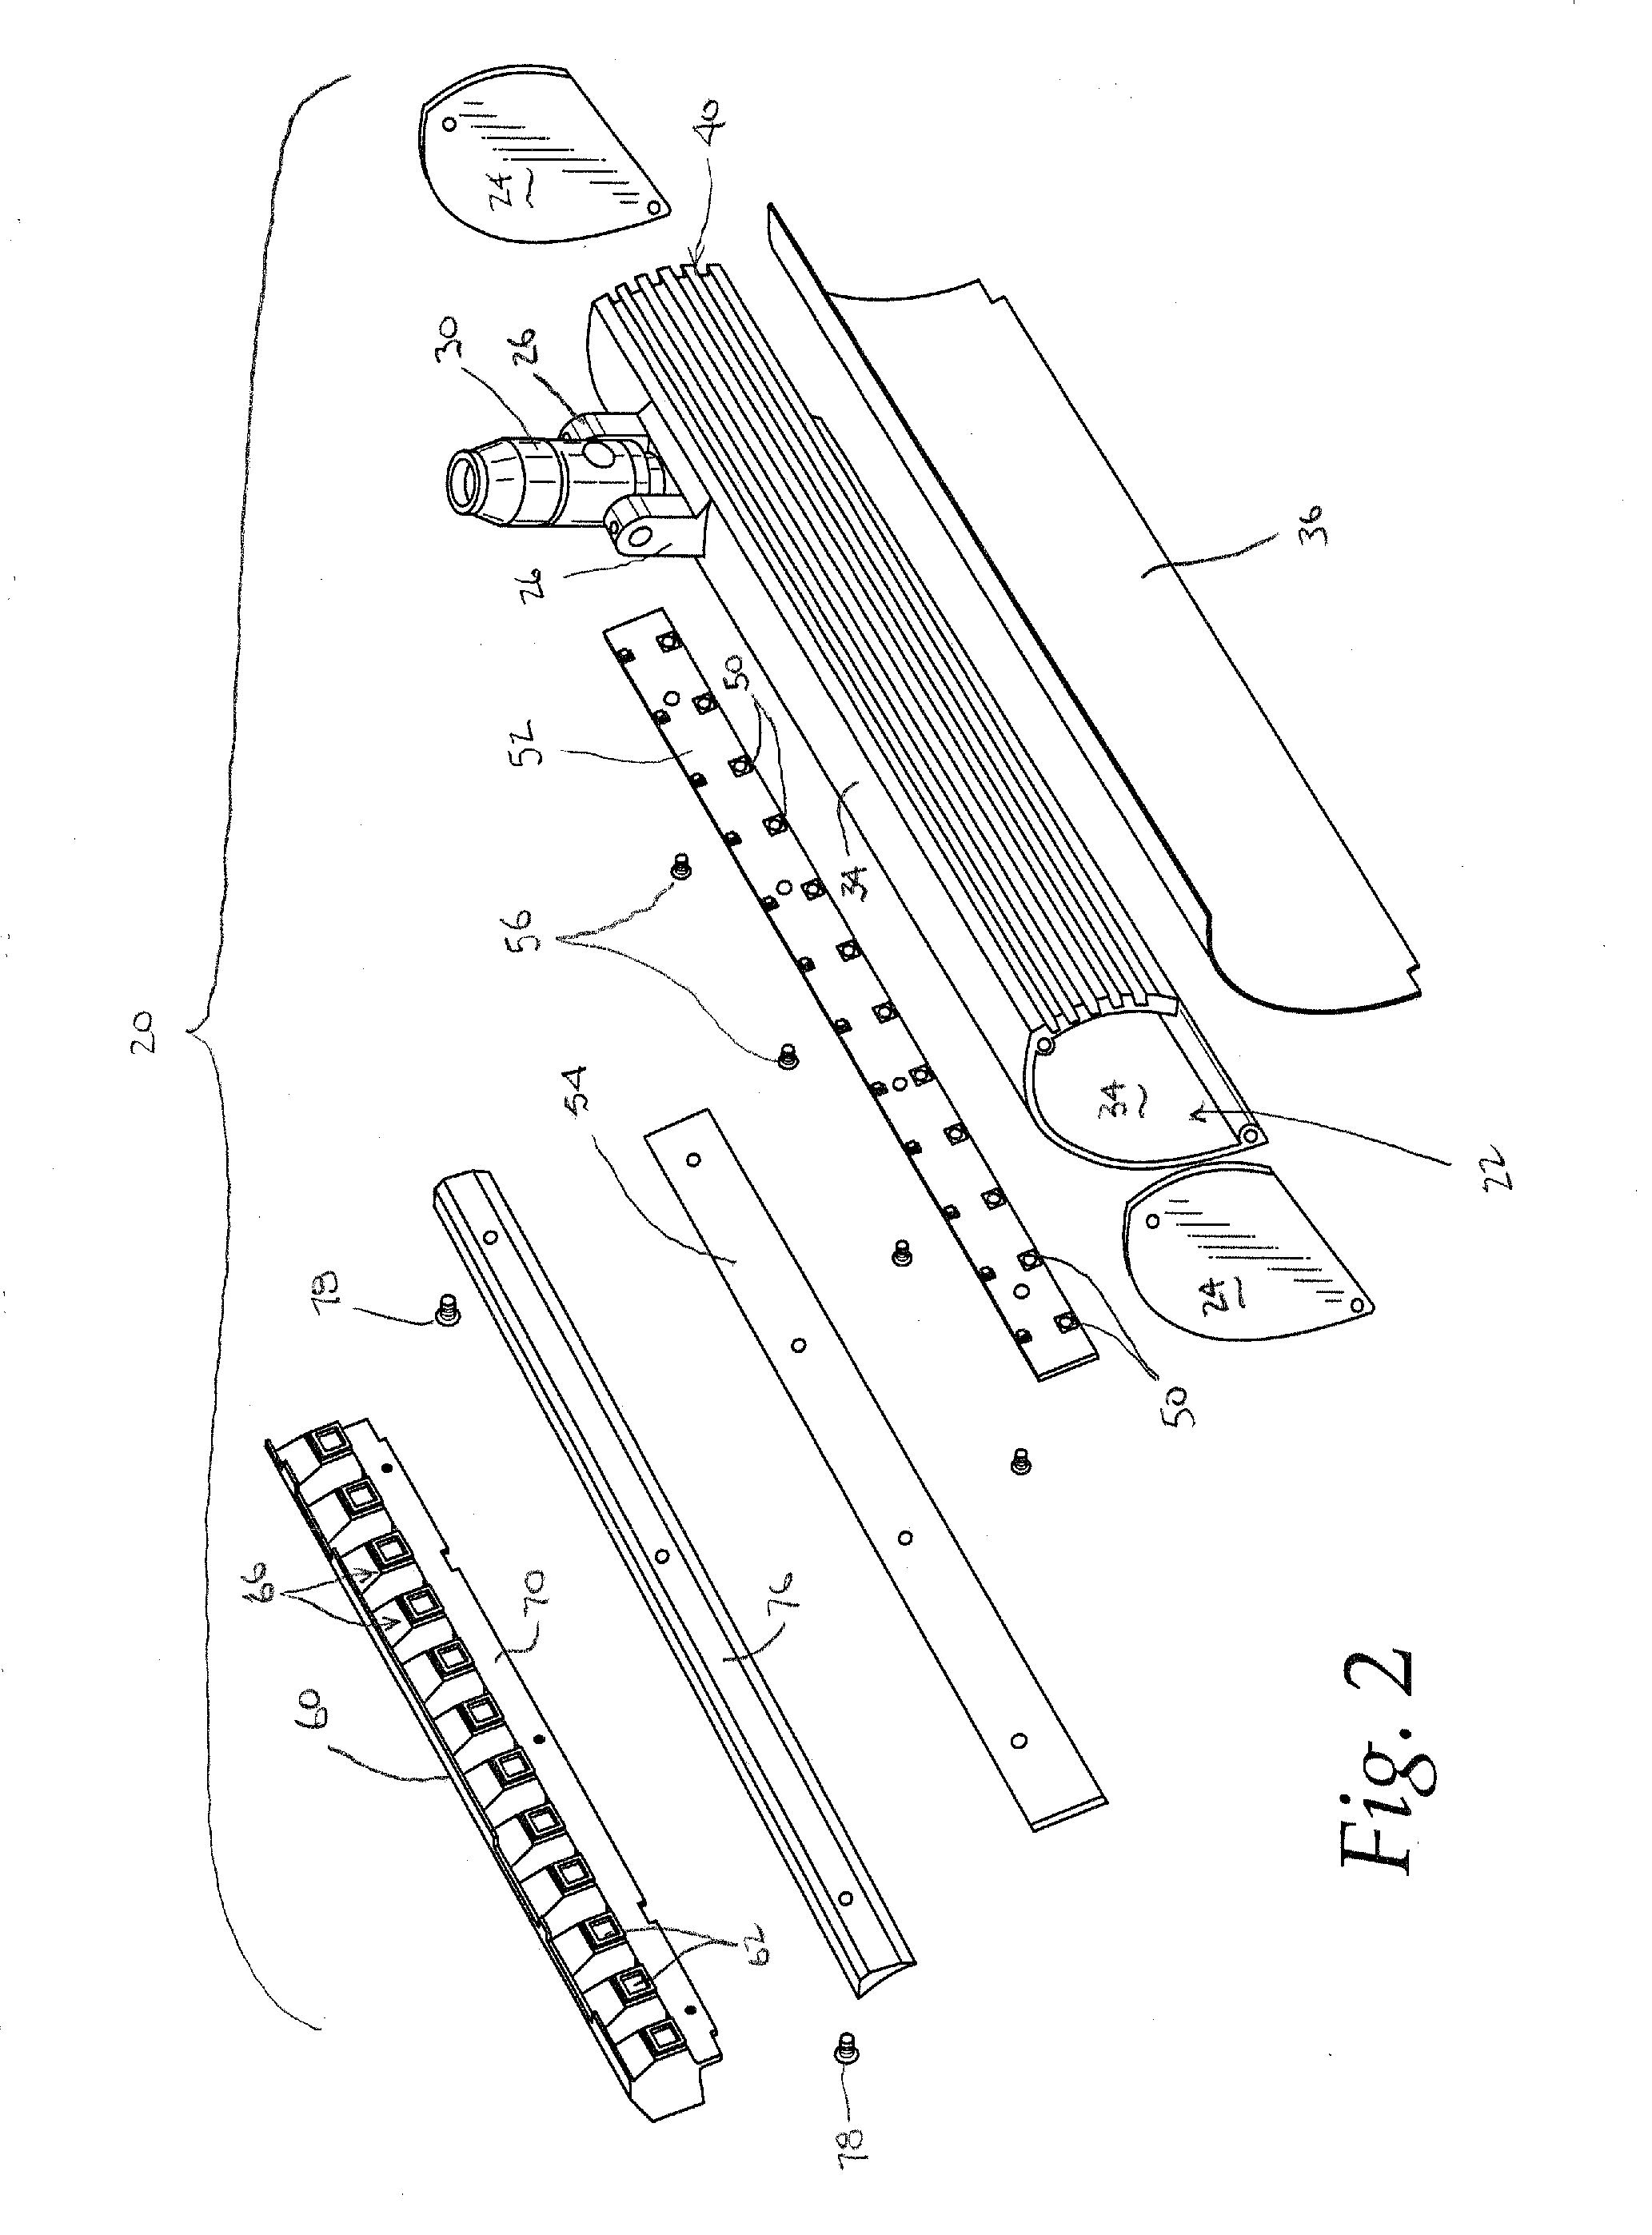 Light Fixture with Directed LED Light